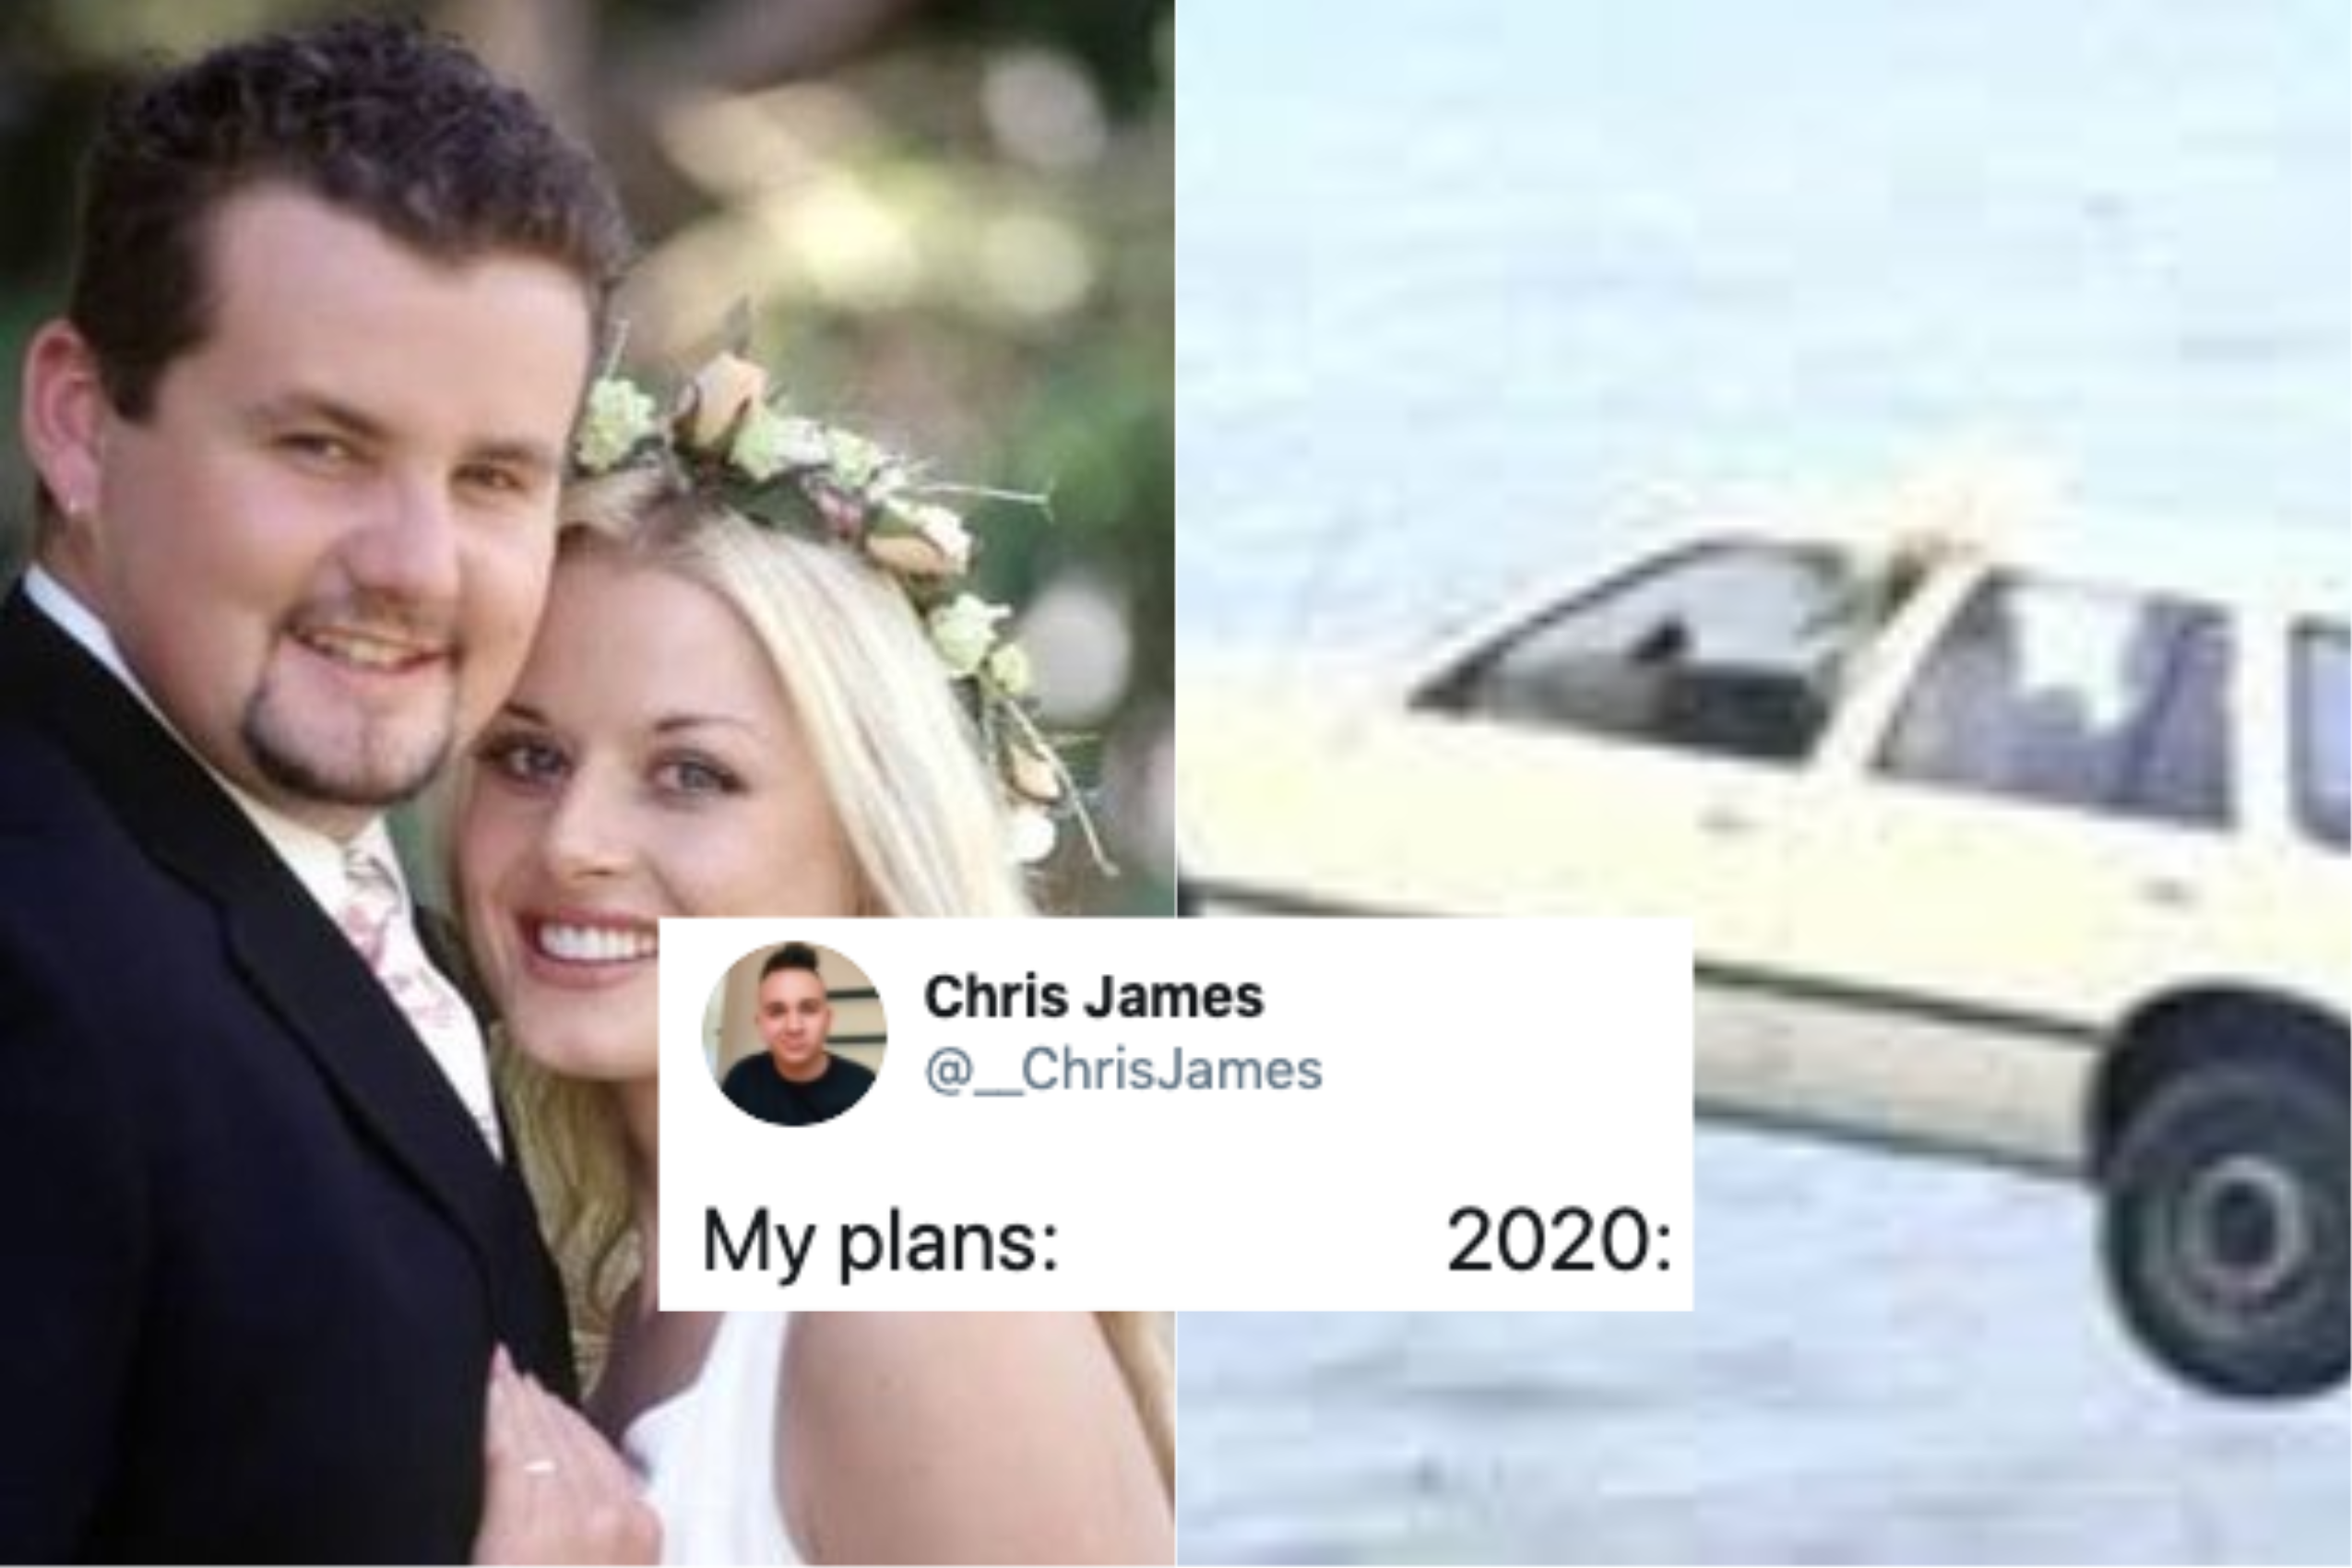 People Are Sharing Memes About Their Ruined 2020 Plans & Every Single One Hits So Hard